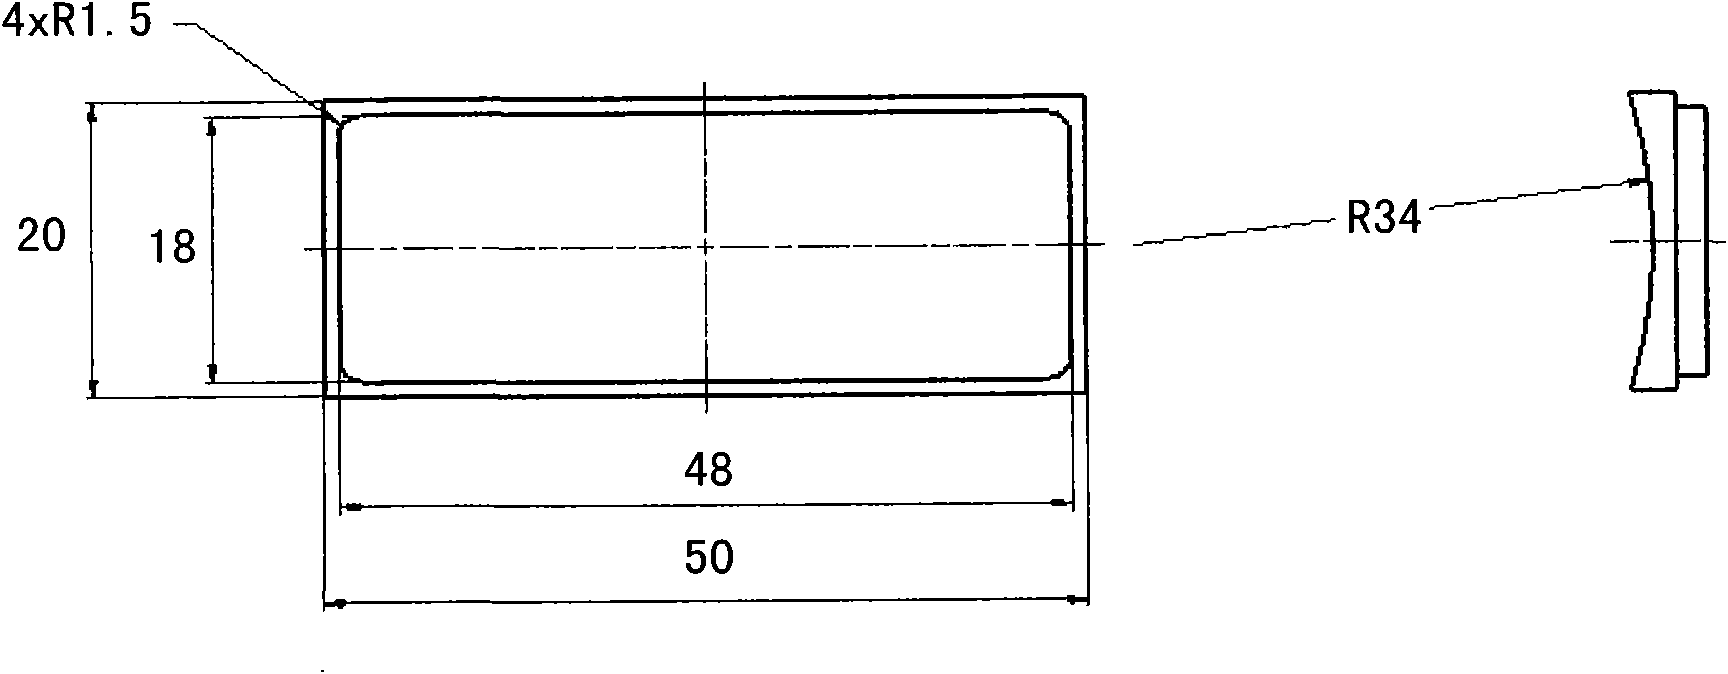 Structure of high-power strip beam electron gun with rectangular section